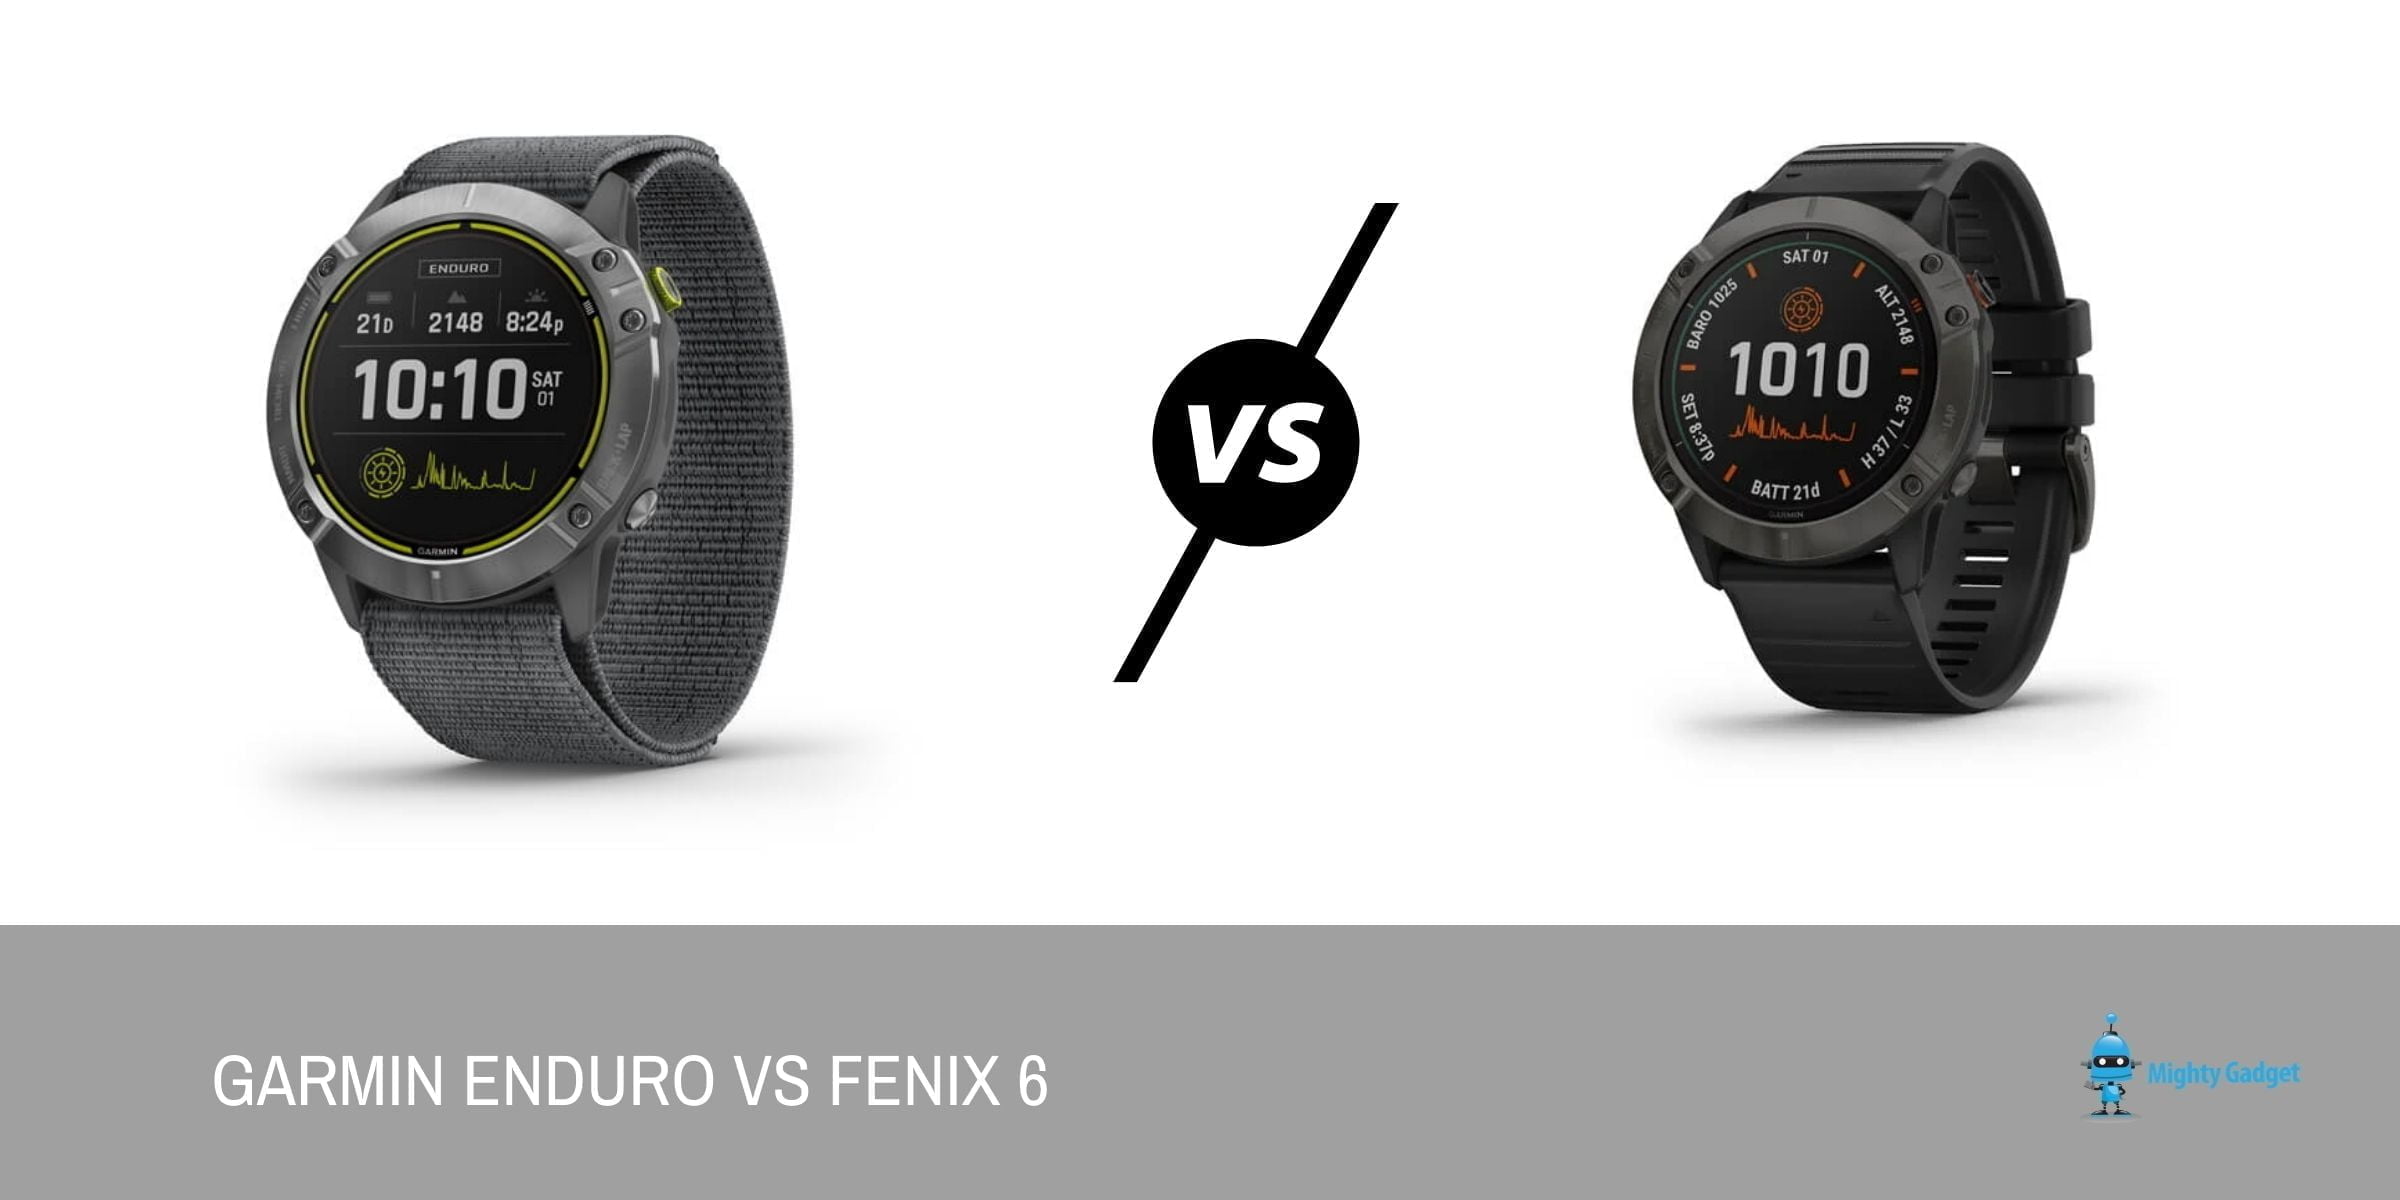 Garmin Enduro vs Fenix 6 – A £700 base model Fenix 6 but with an incredible battery life of 65 days for the smartwatch & 80 hours GPS